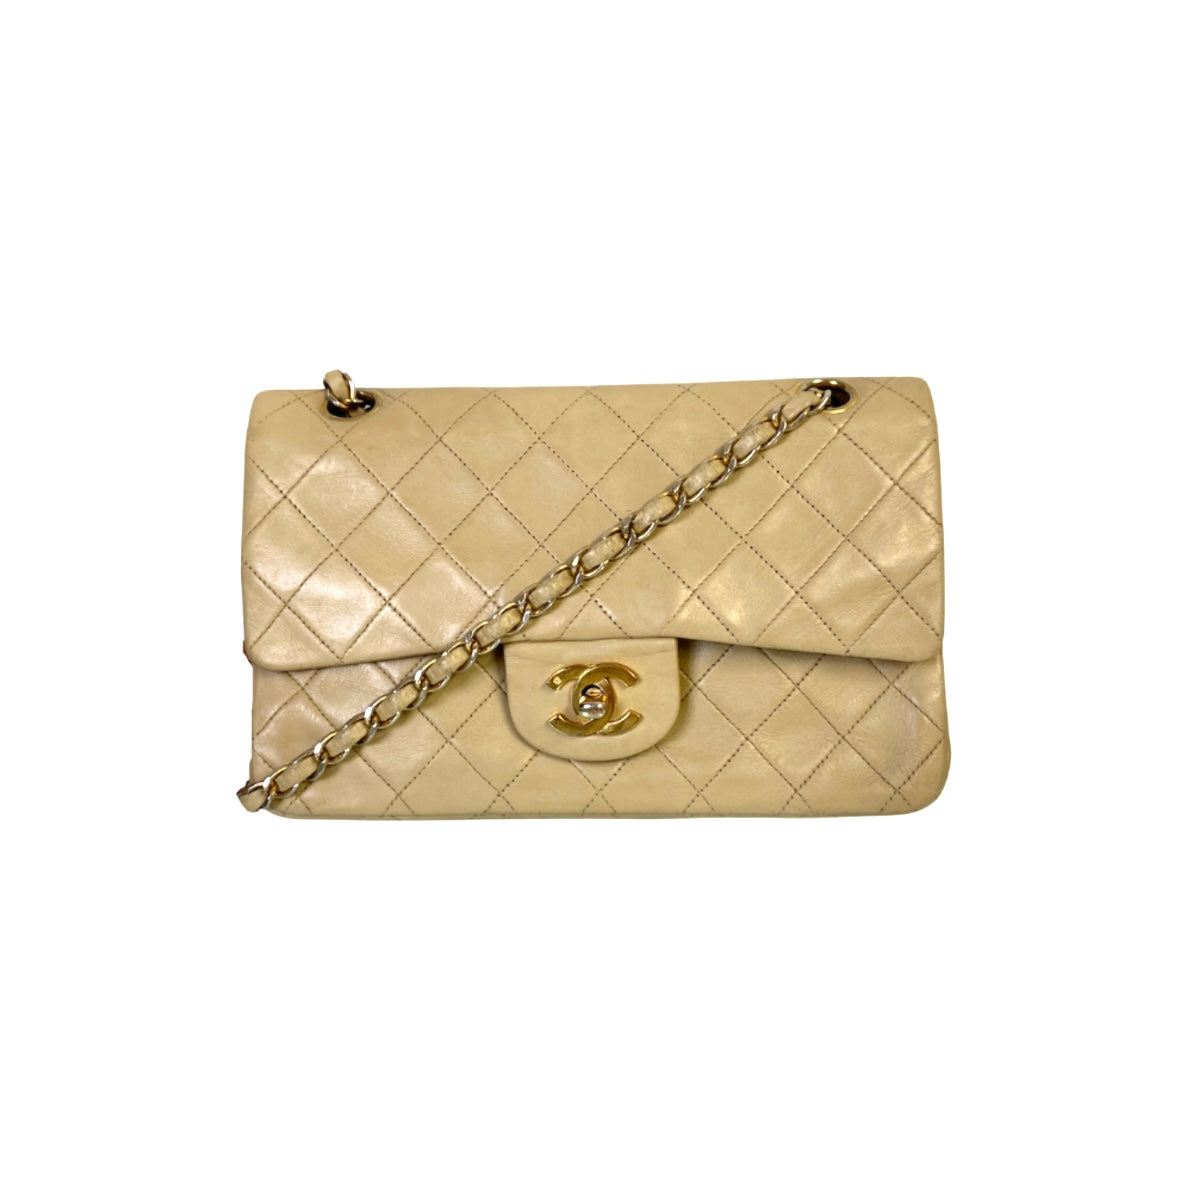 Pre-Owned CHANEL Bags, Classic Flap Bags & More